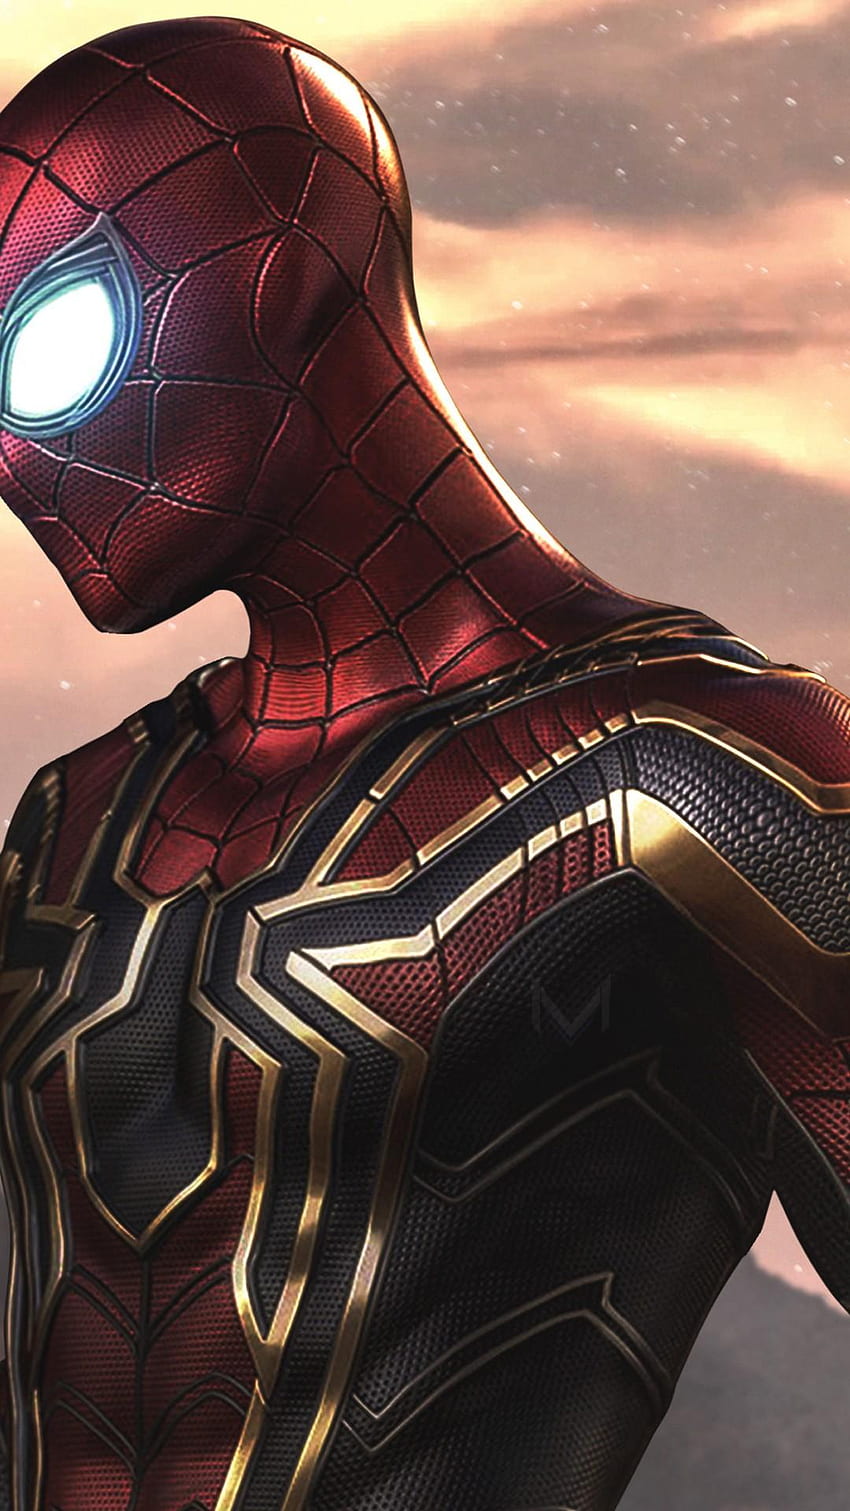 Spider Man With His Iron Spider Suit 4K wallpaper download